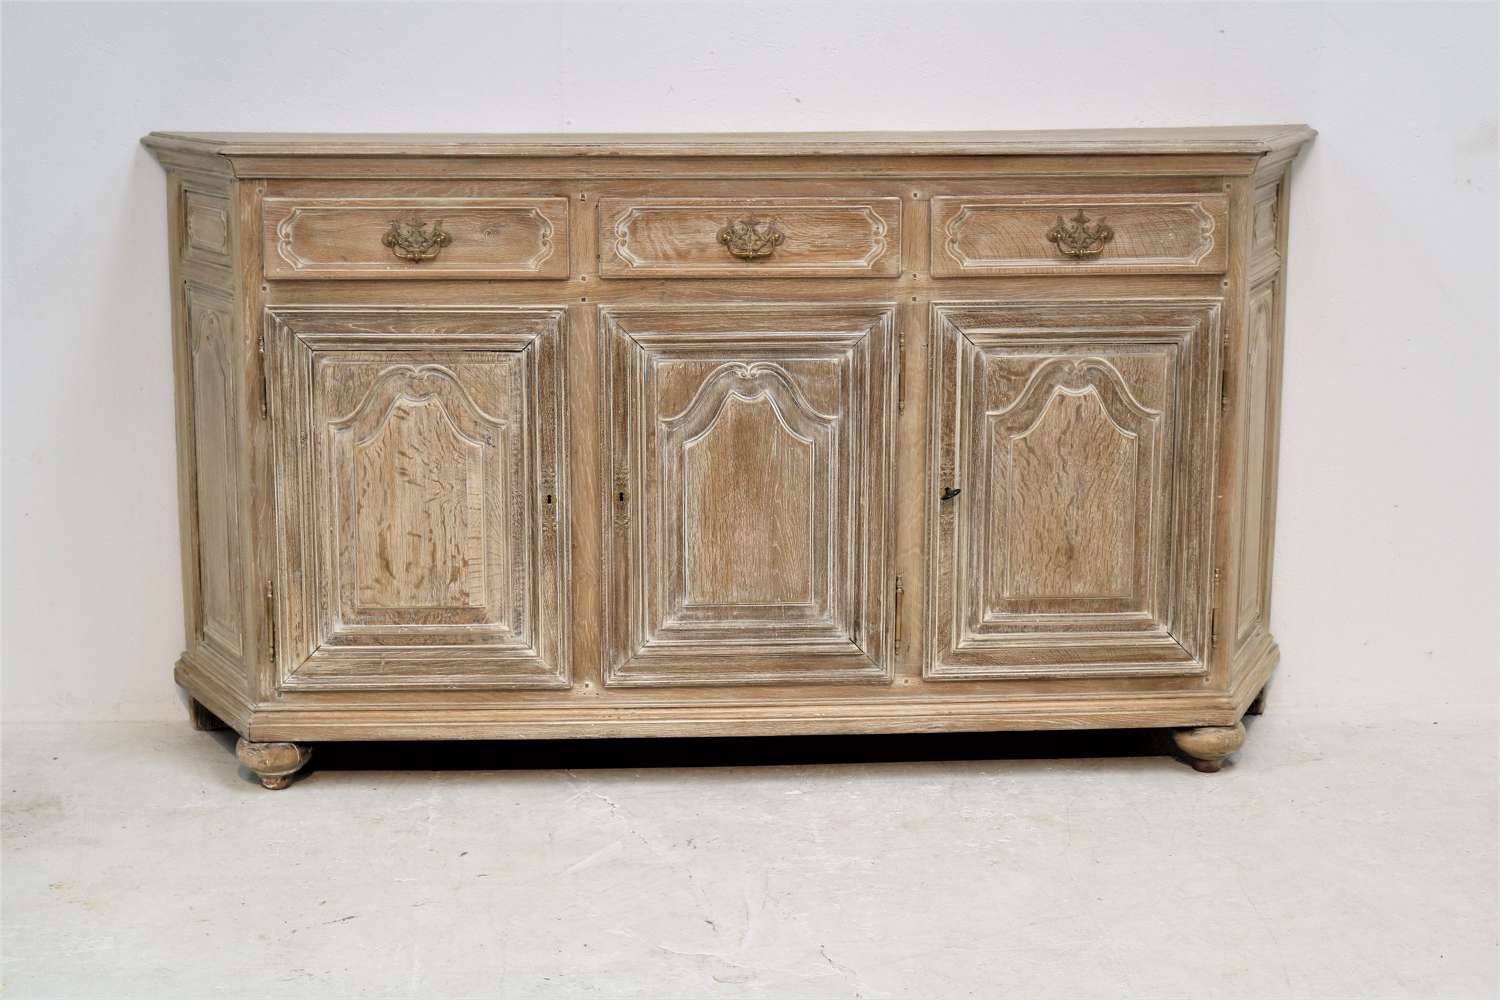 Early 20th century canted corner oak enfilade